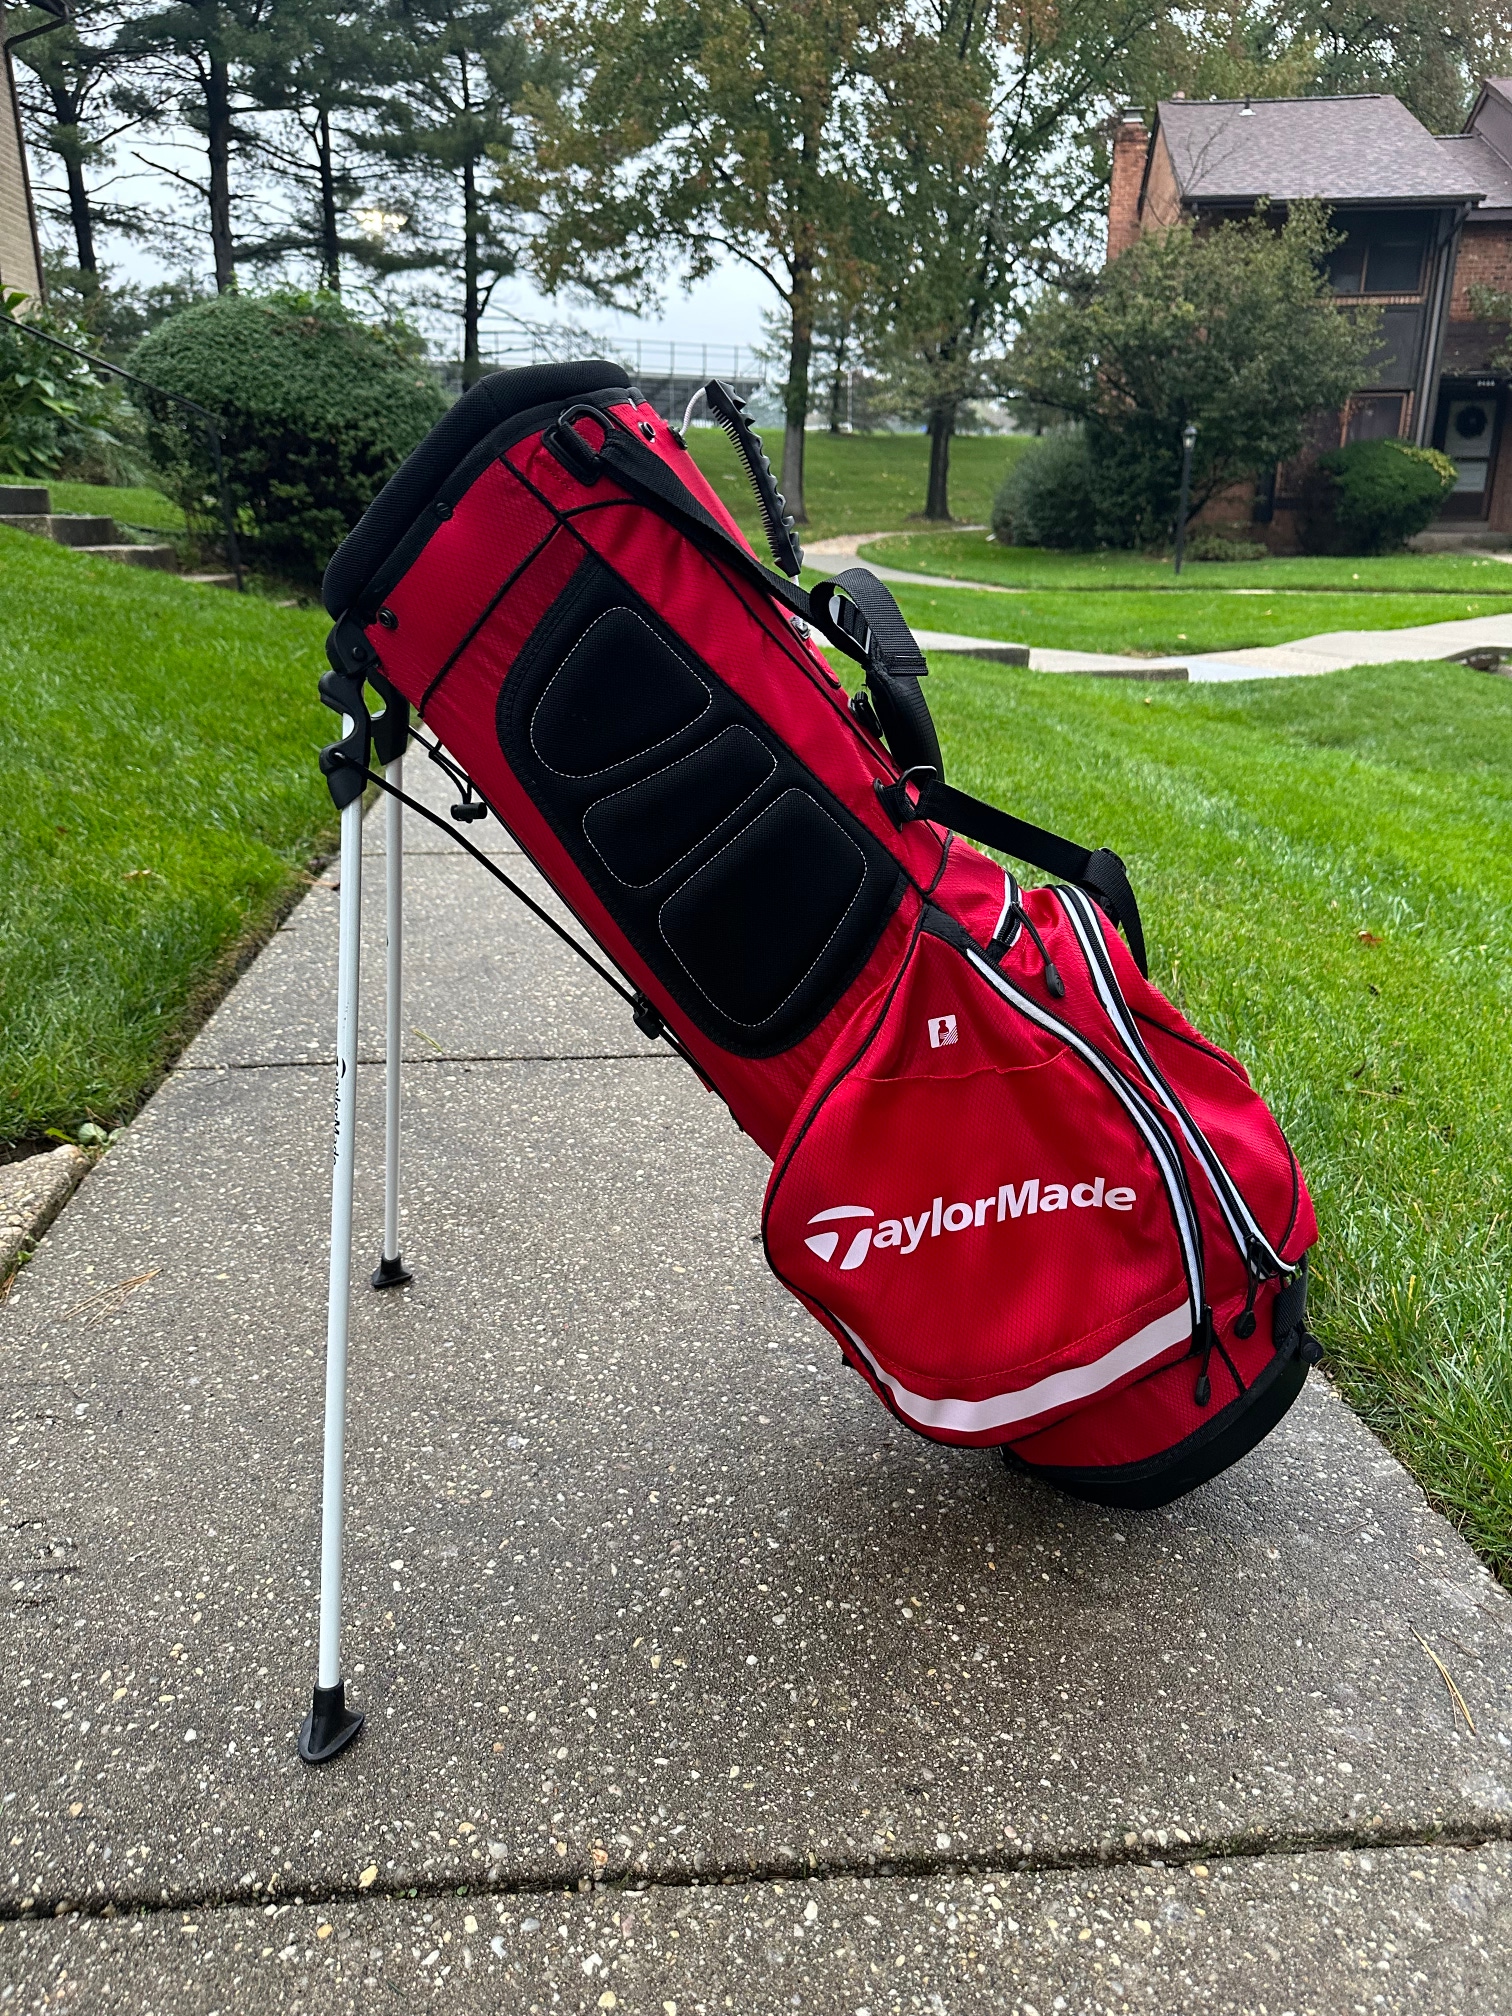 TaylorMade Stand Golf Bag Used